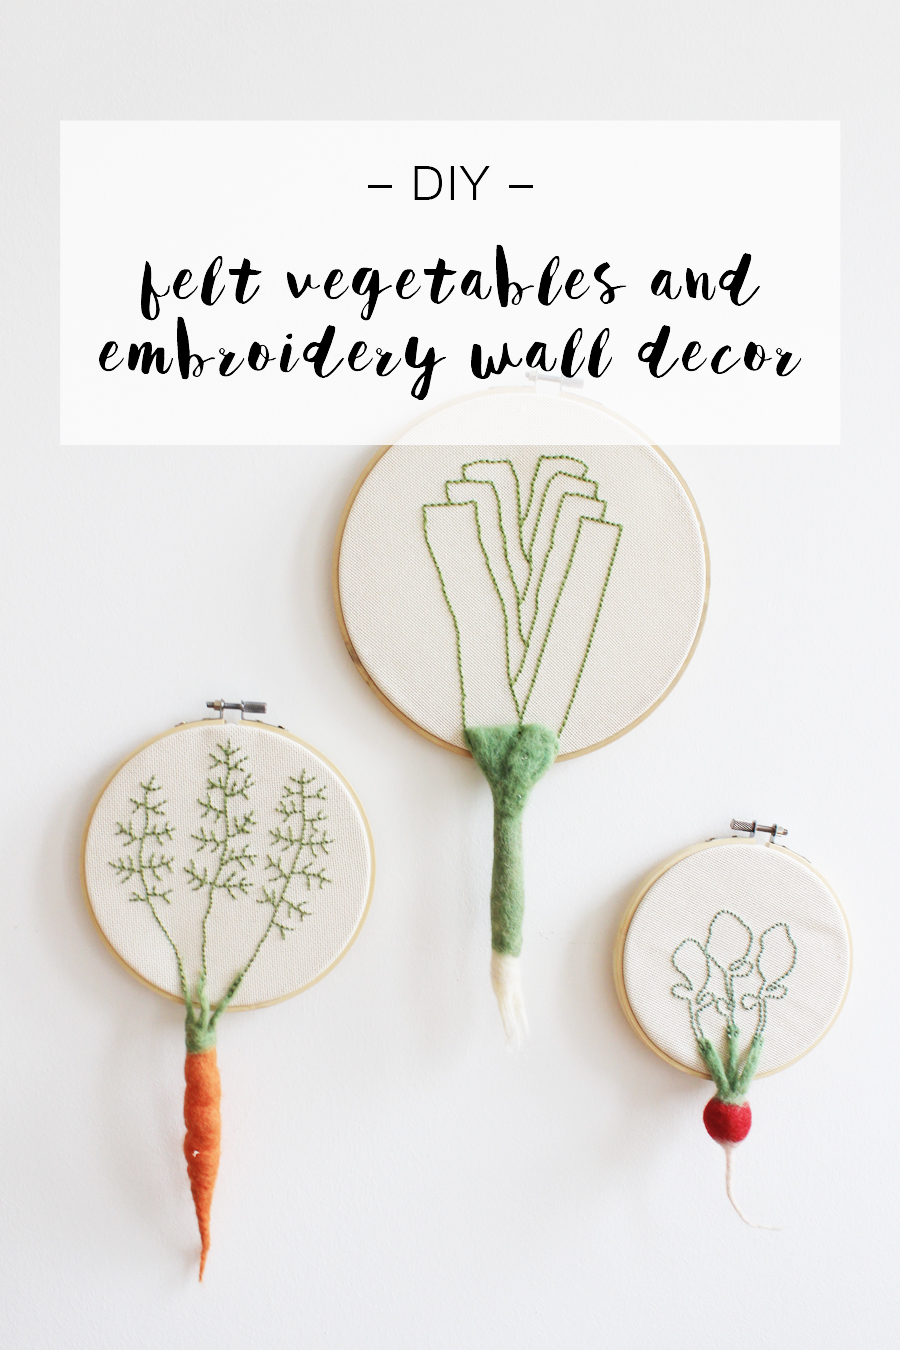 DIY felt vegetables and embroidery wall decor | LOOK WHAT I MADE ...